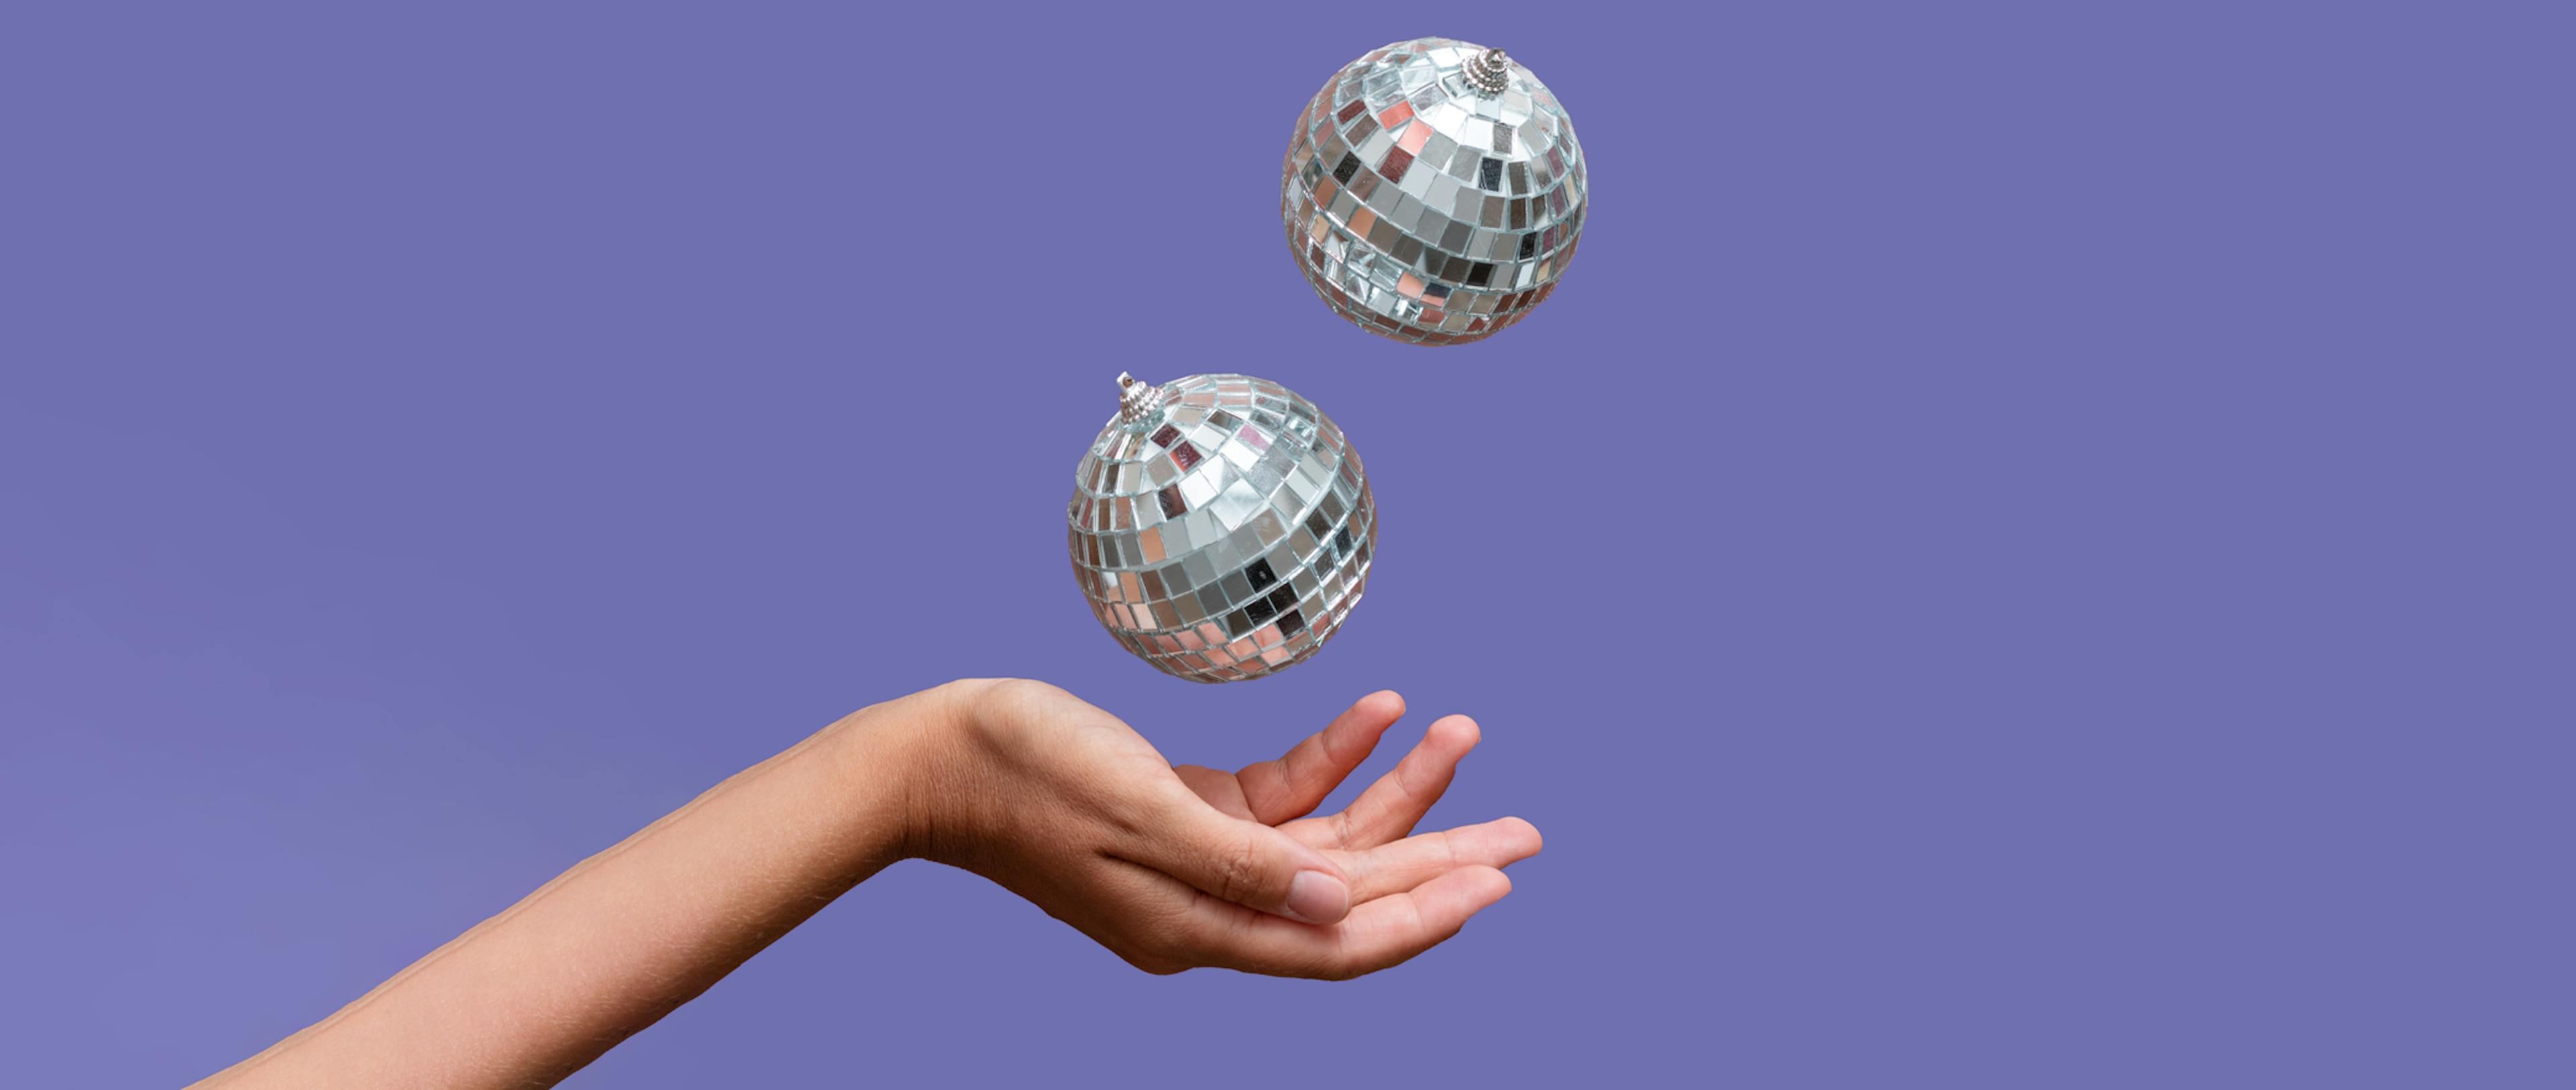 A hand juggling two disco balls